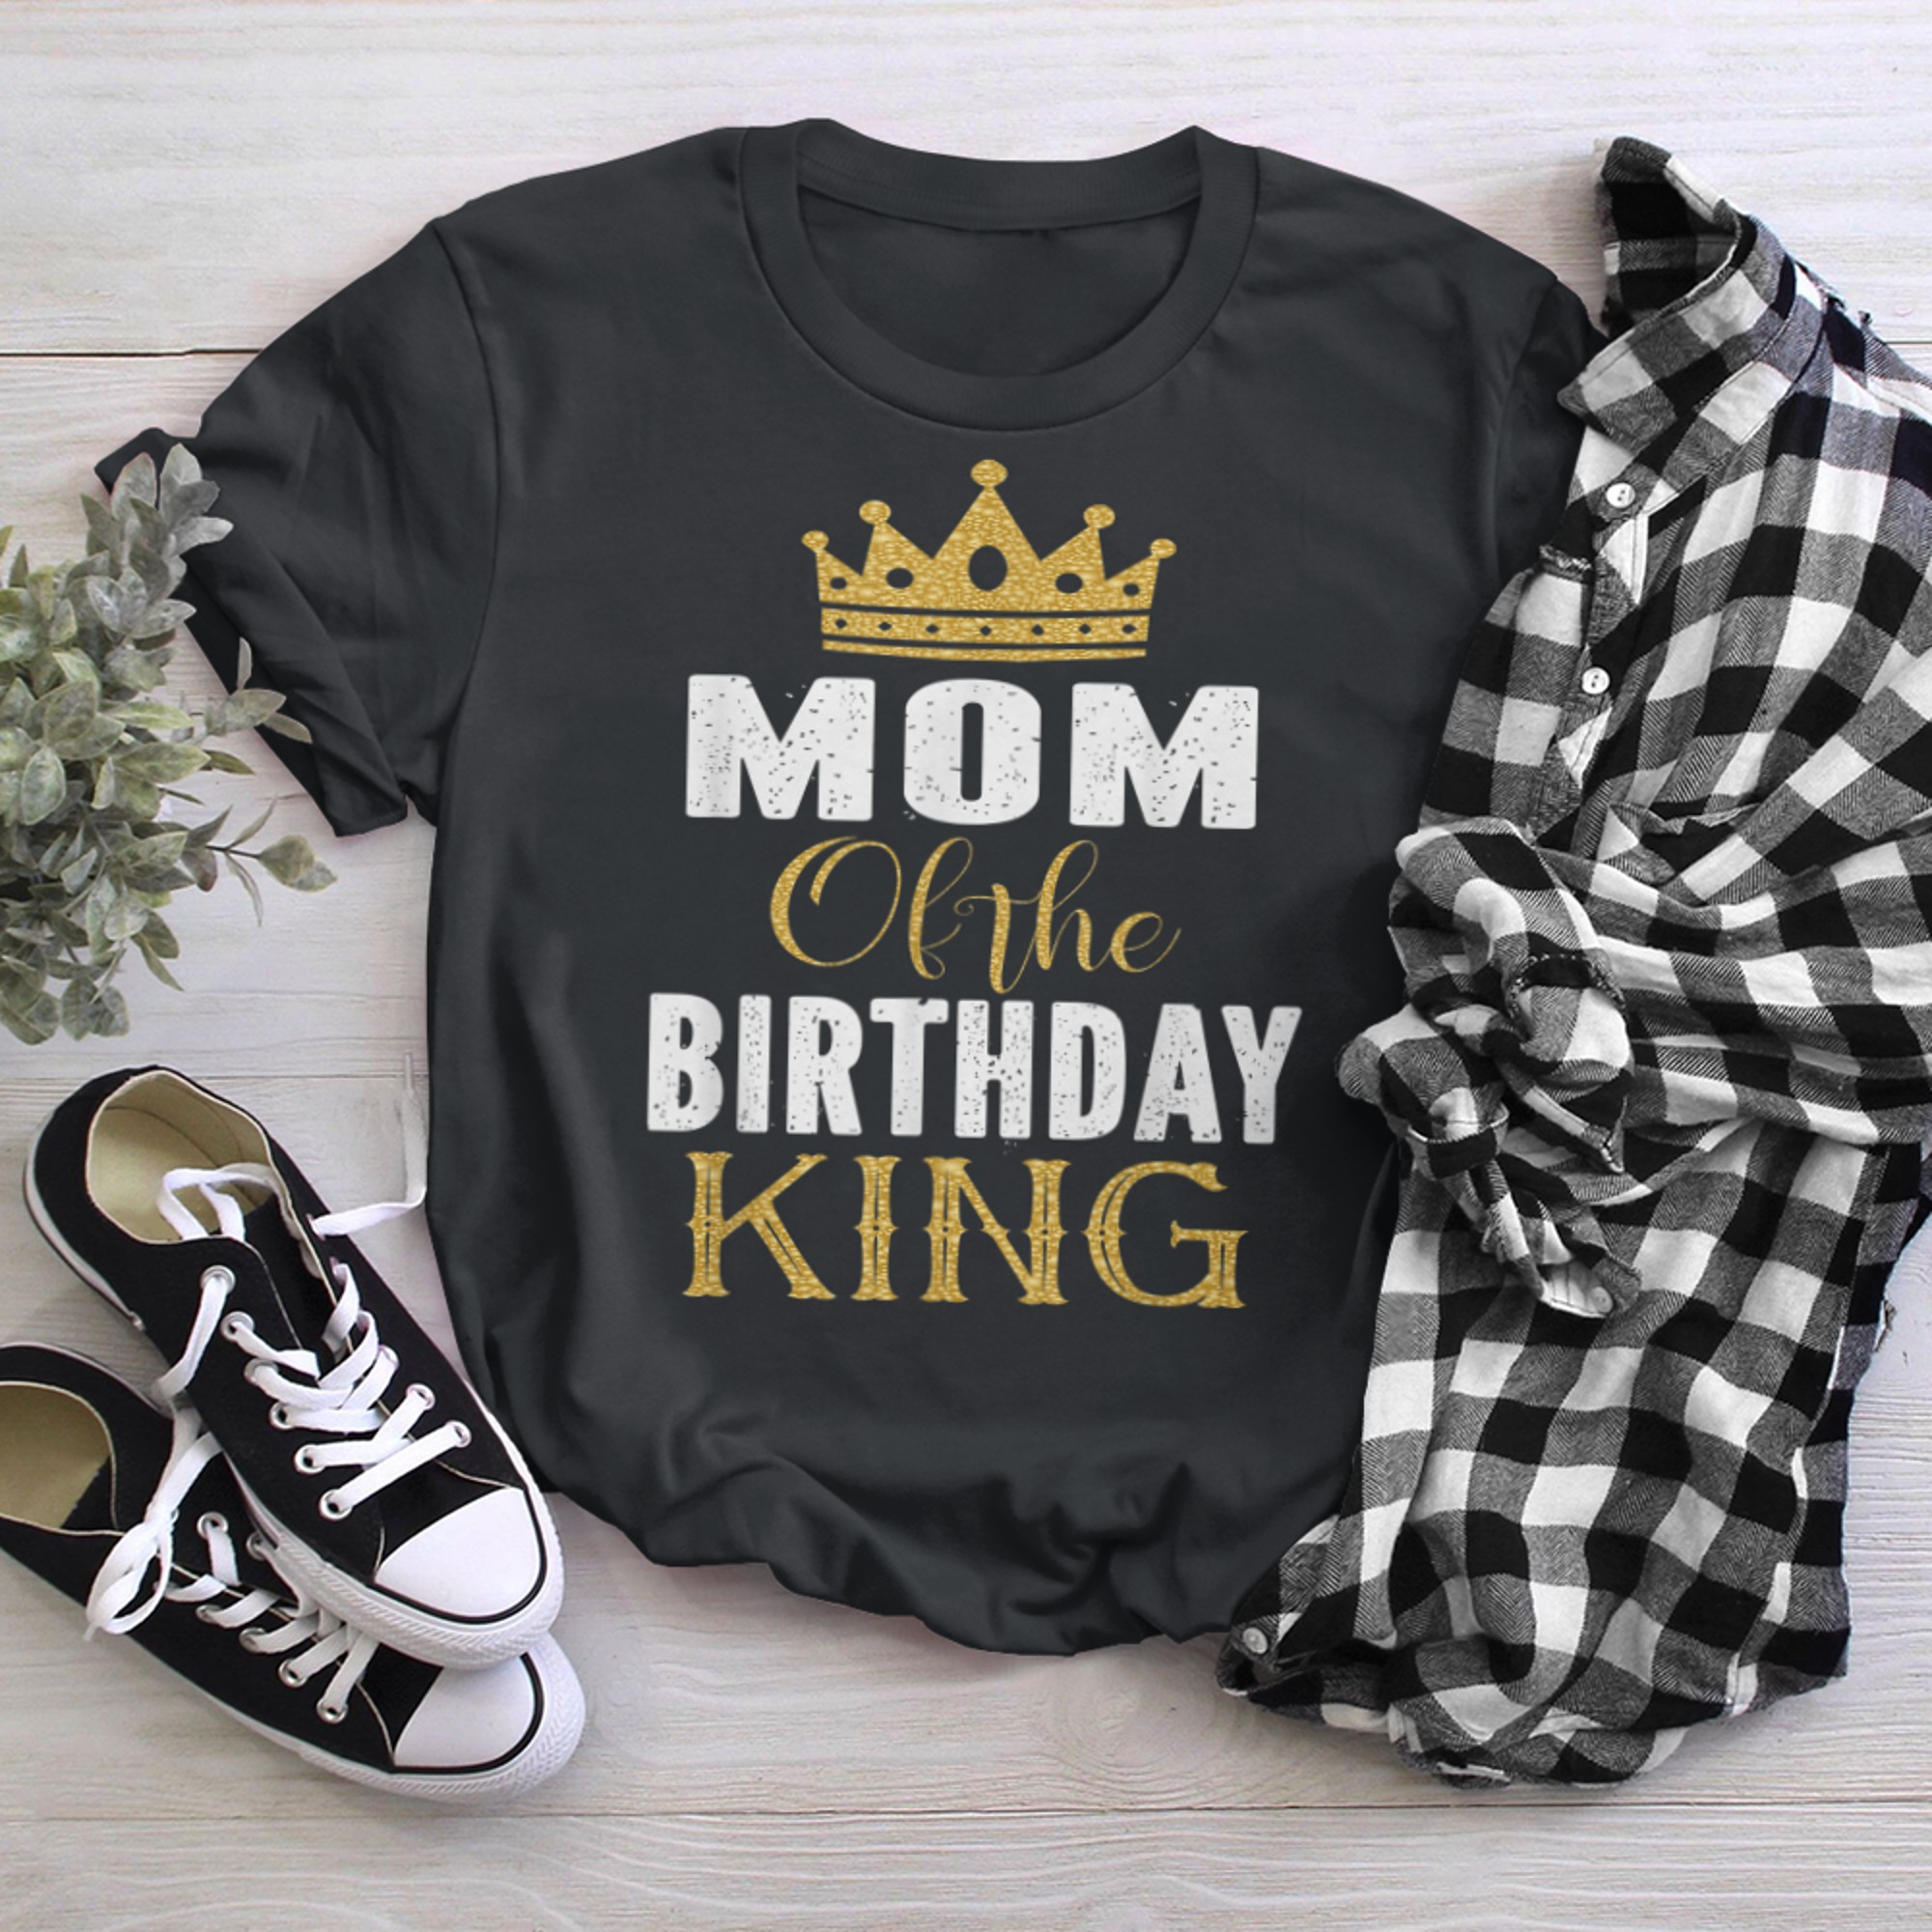 Mom Of The Birthday King Bday Party For Him t-shirt black